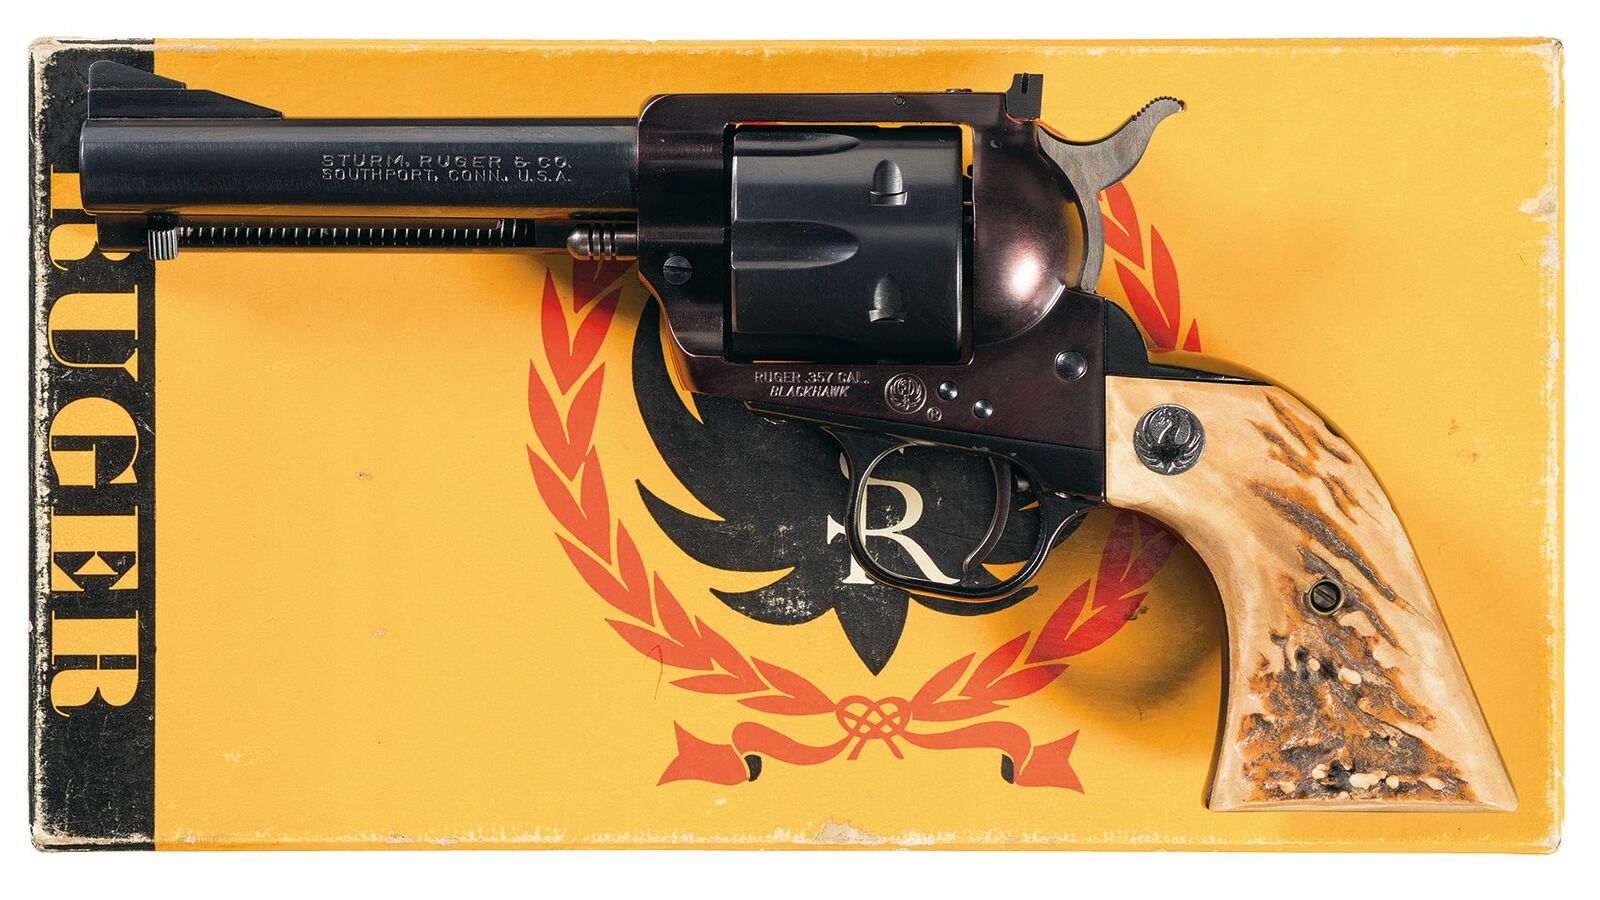 ruger single six serial numbers old model